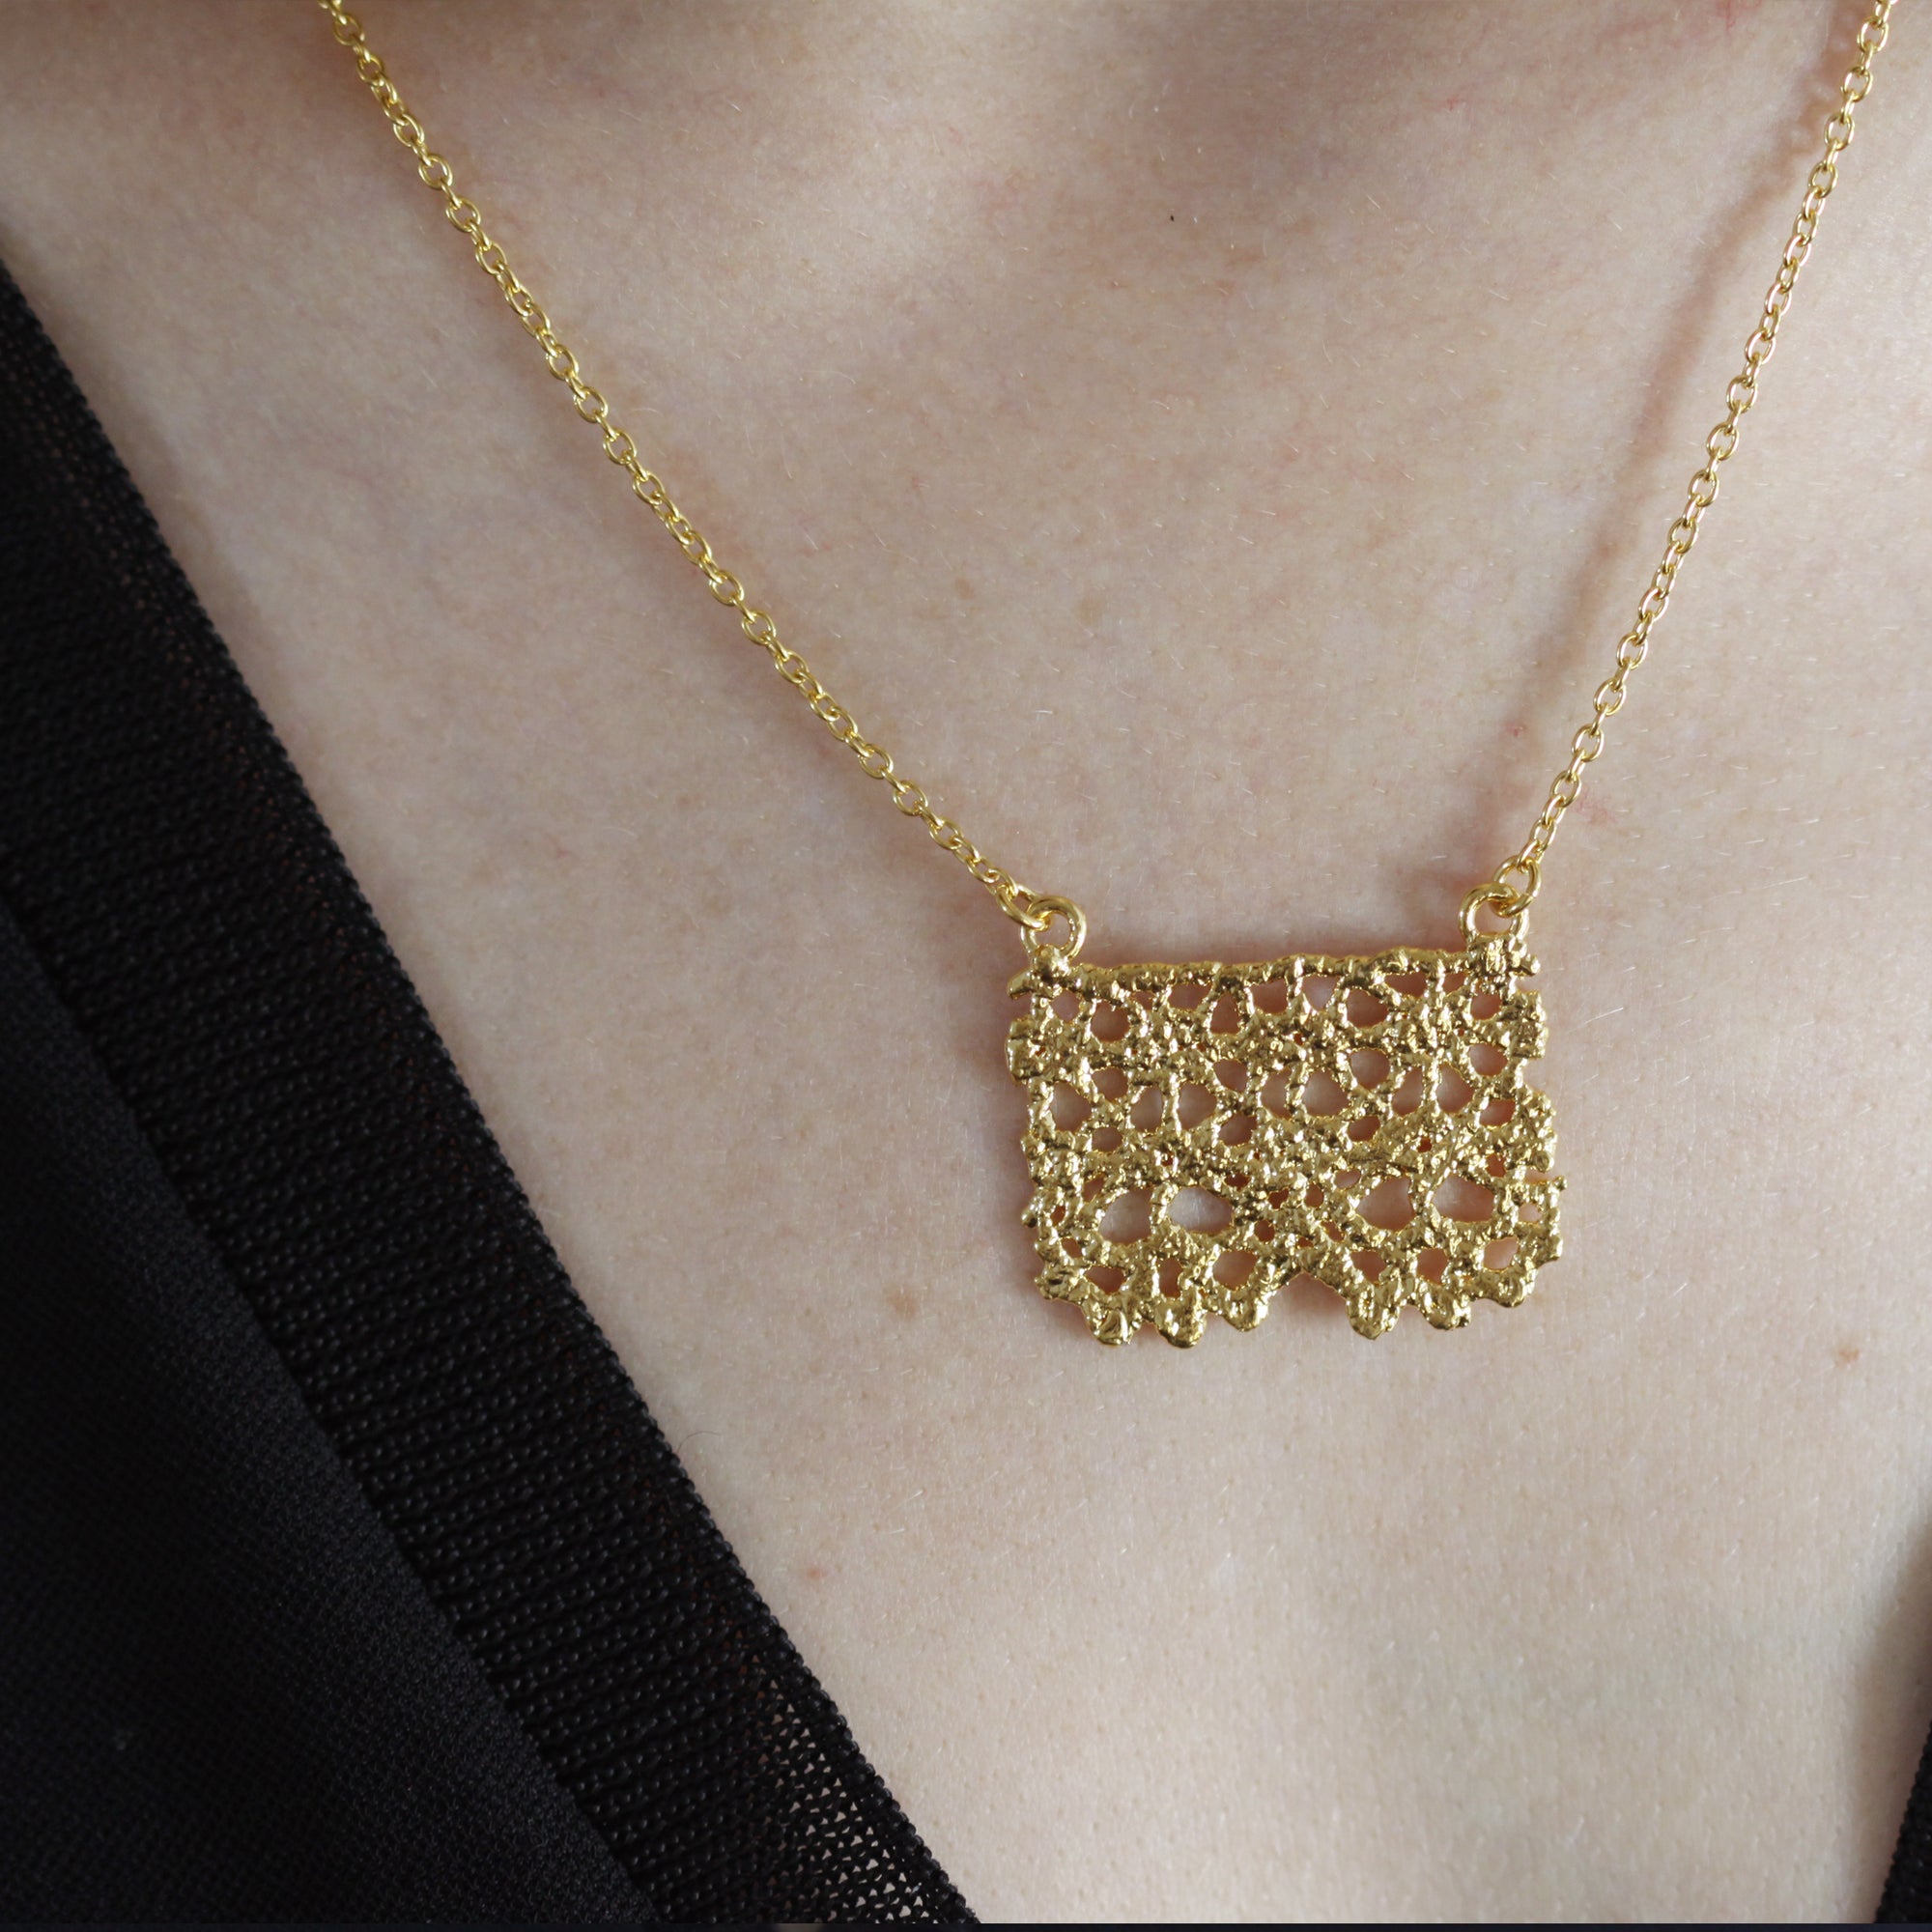 Lace pendant necklace dipped in 24k gold.